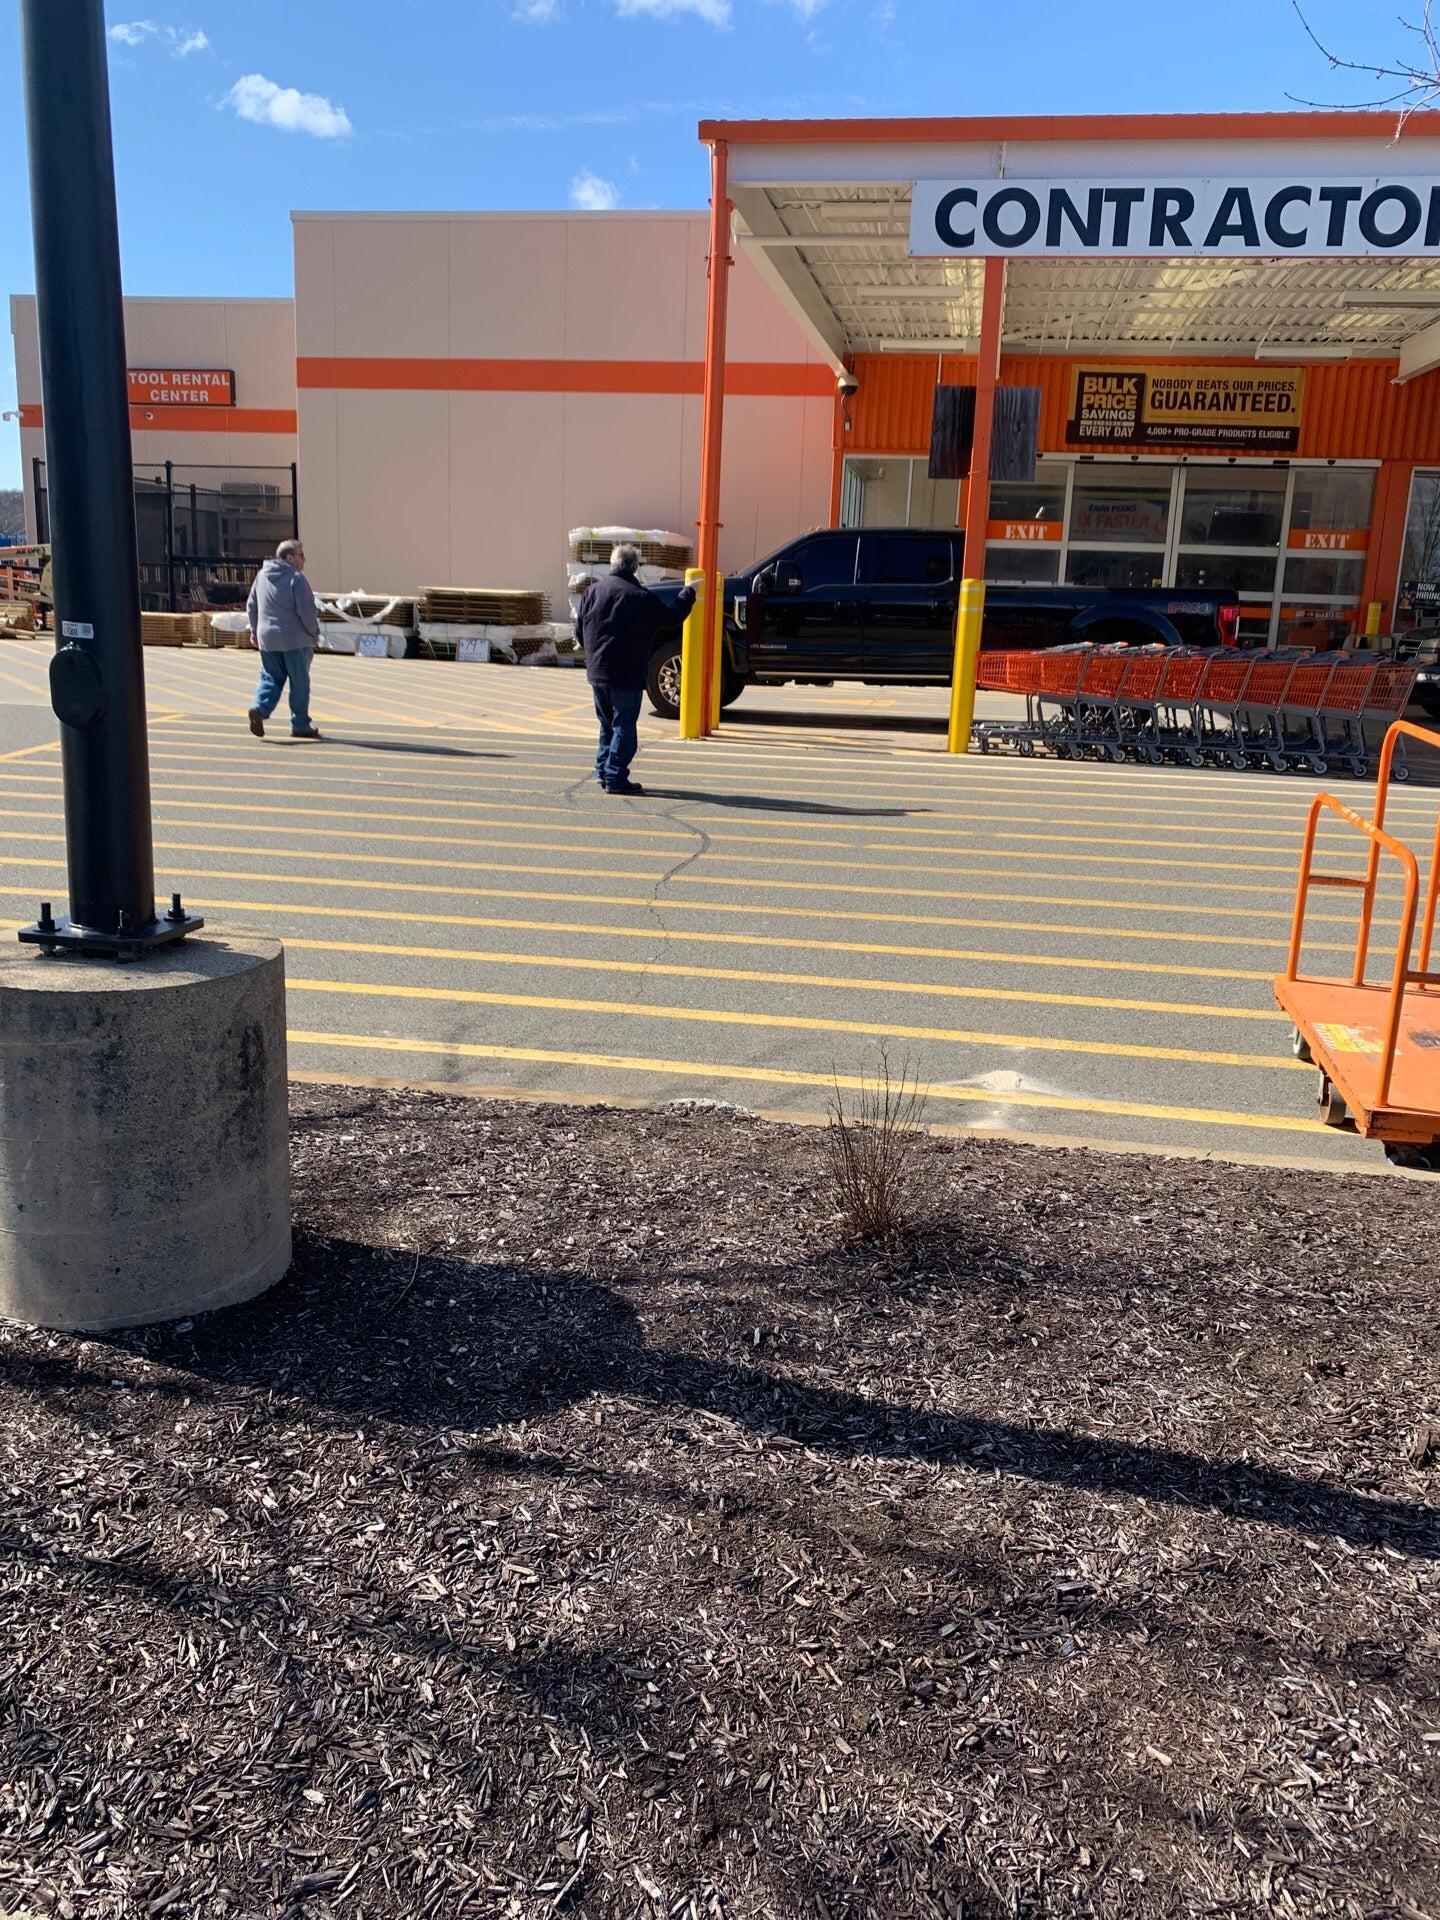 Hope the dude was able to get some chaulk🤣 #homedepot #lincoln #nebra, homedepot